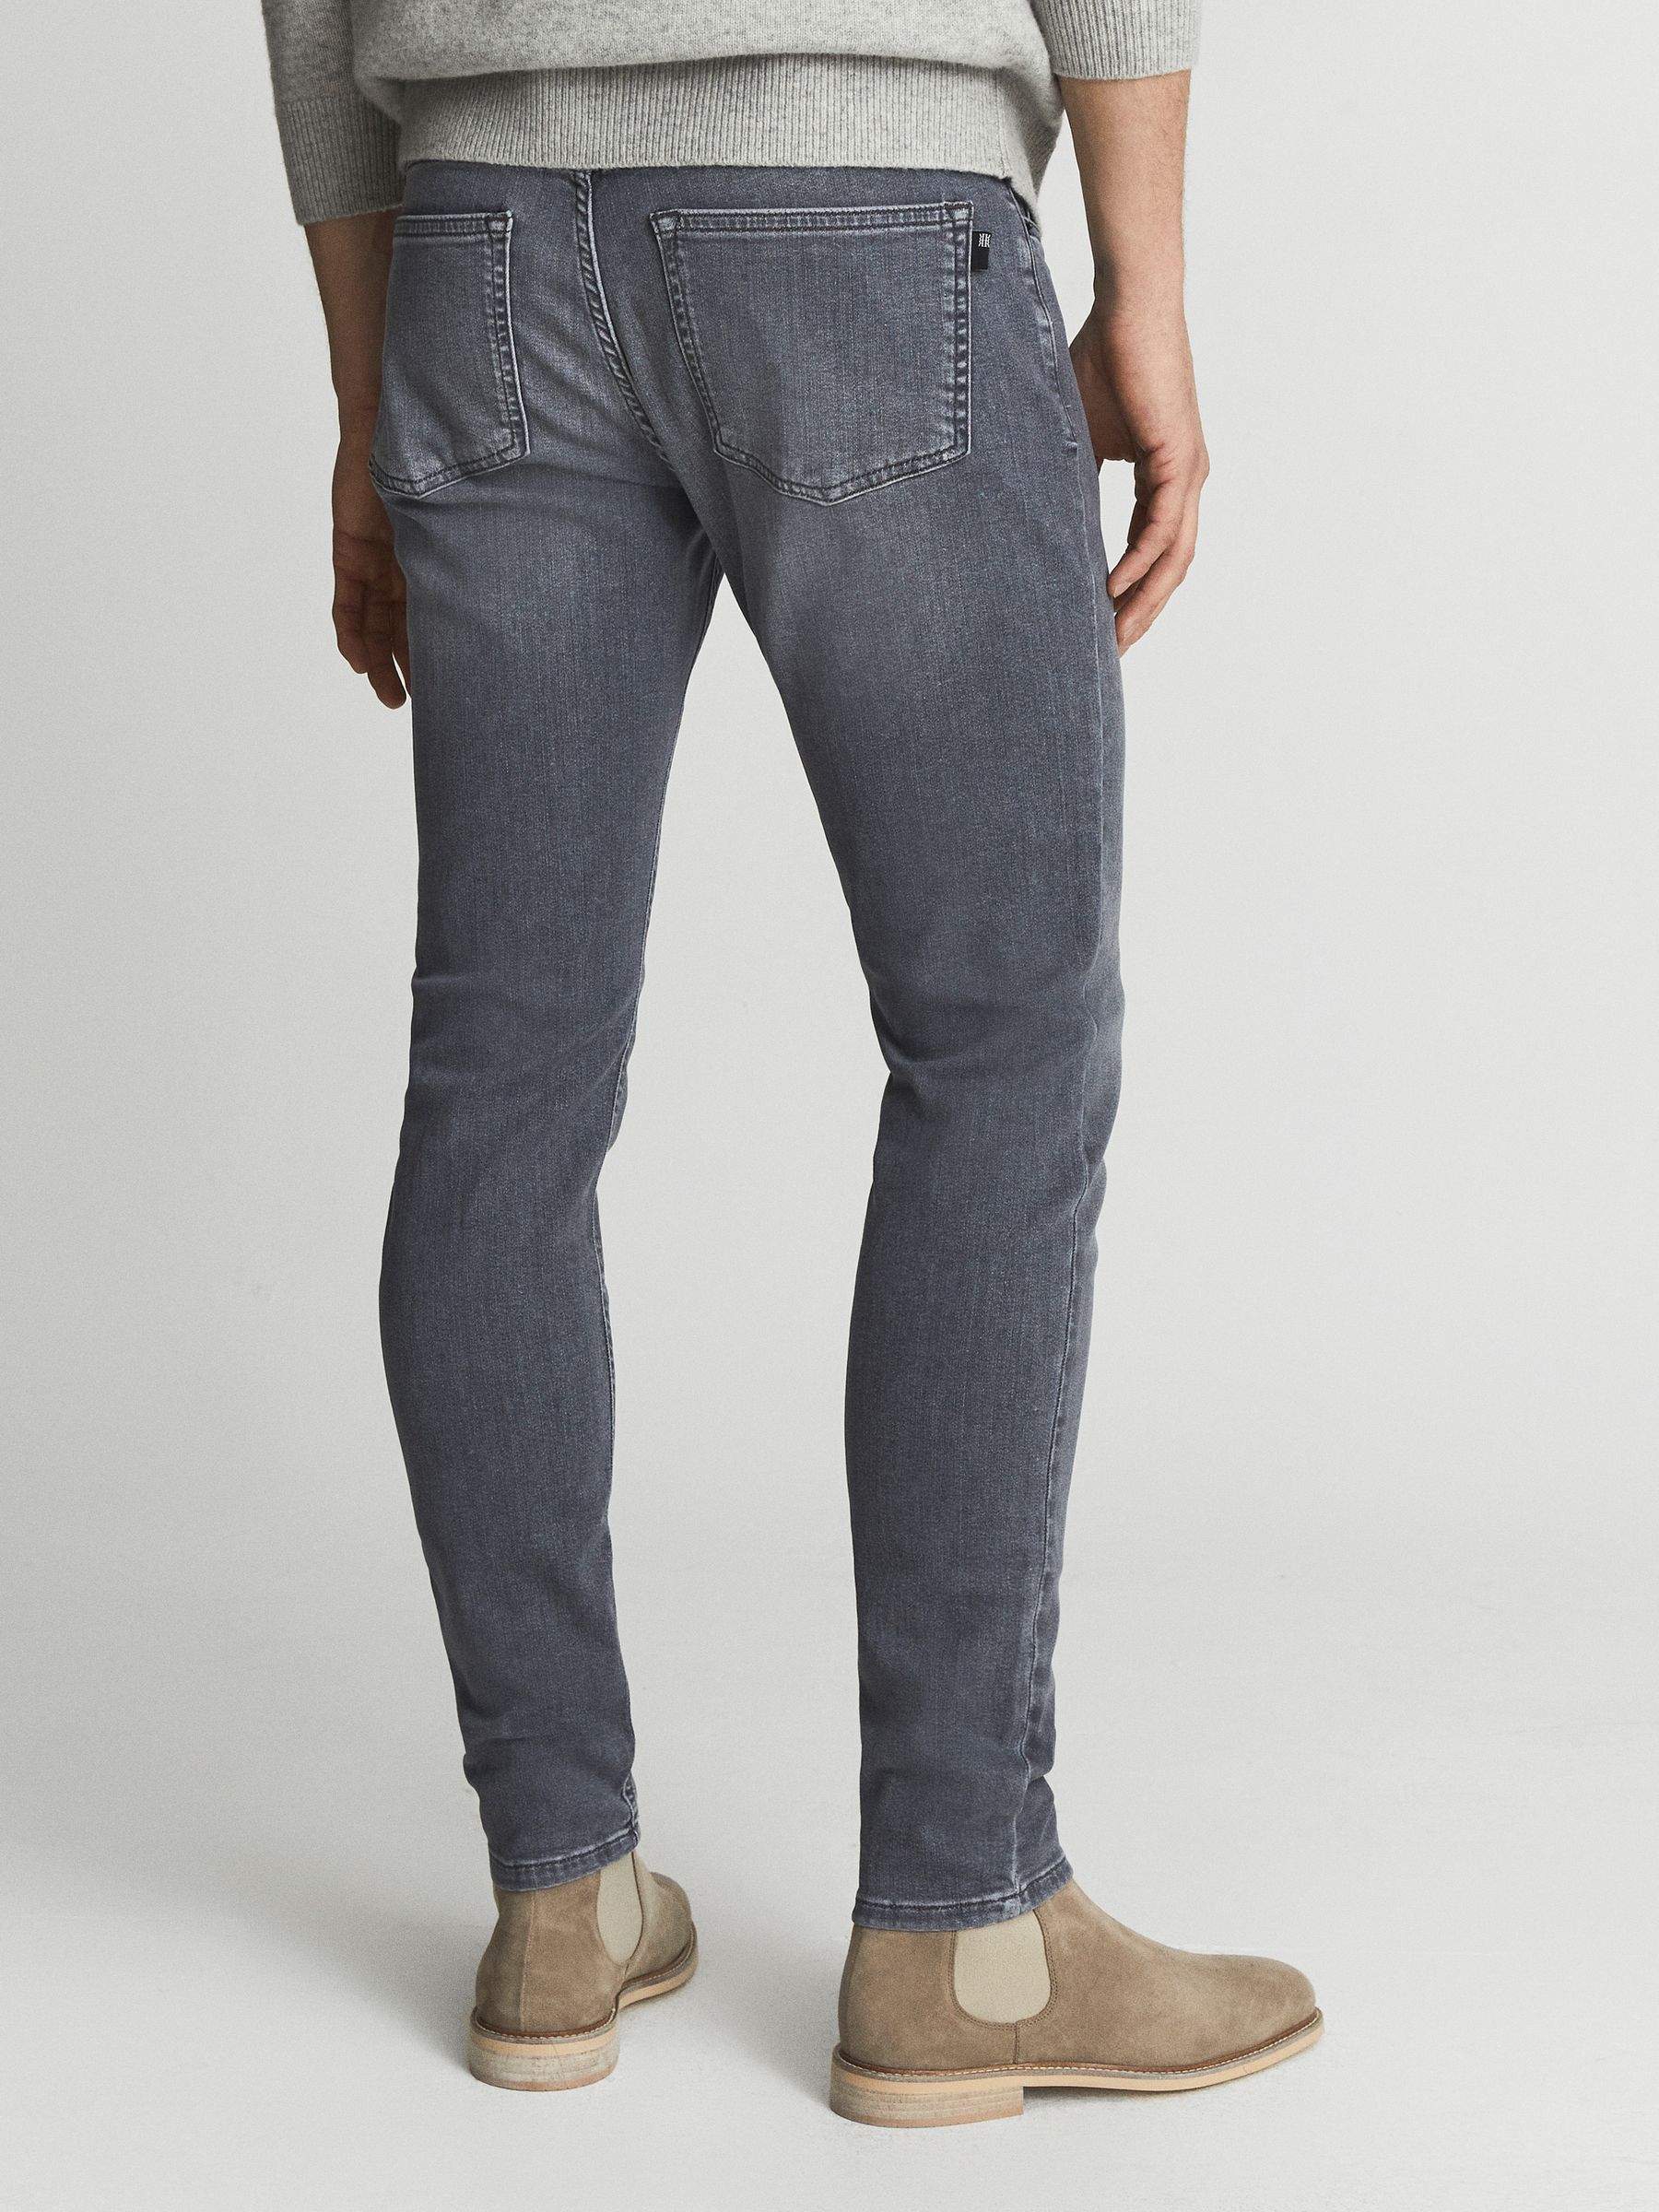 Reiss Harry Super Skinny Washed Jeans - REISS